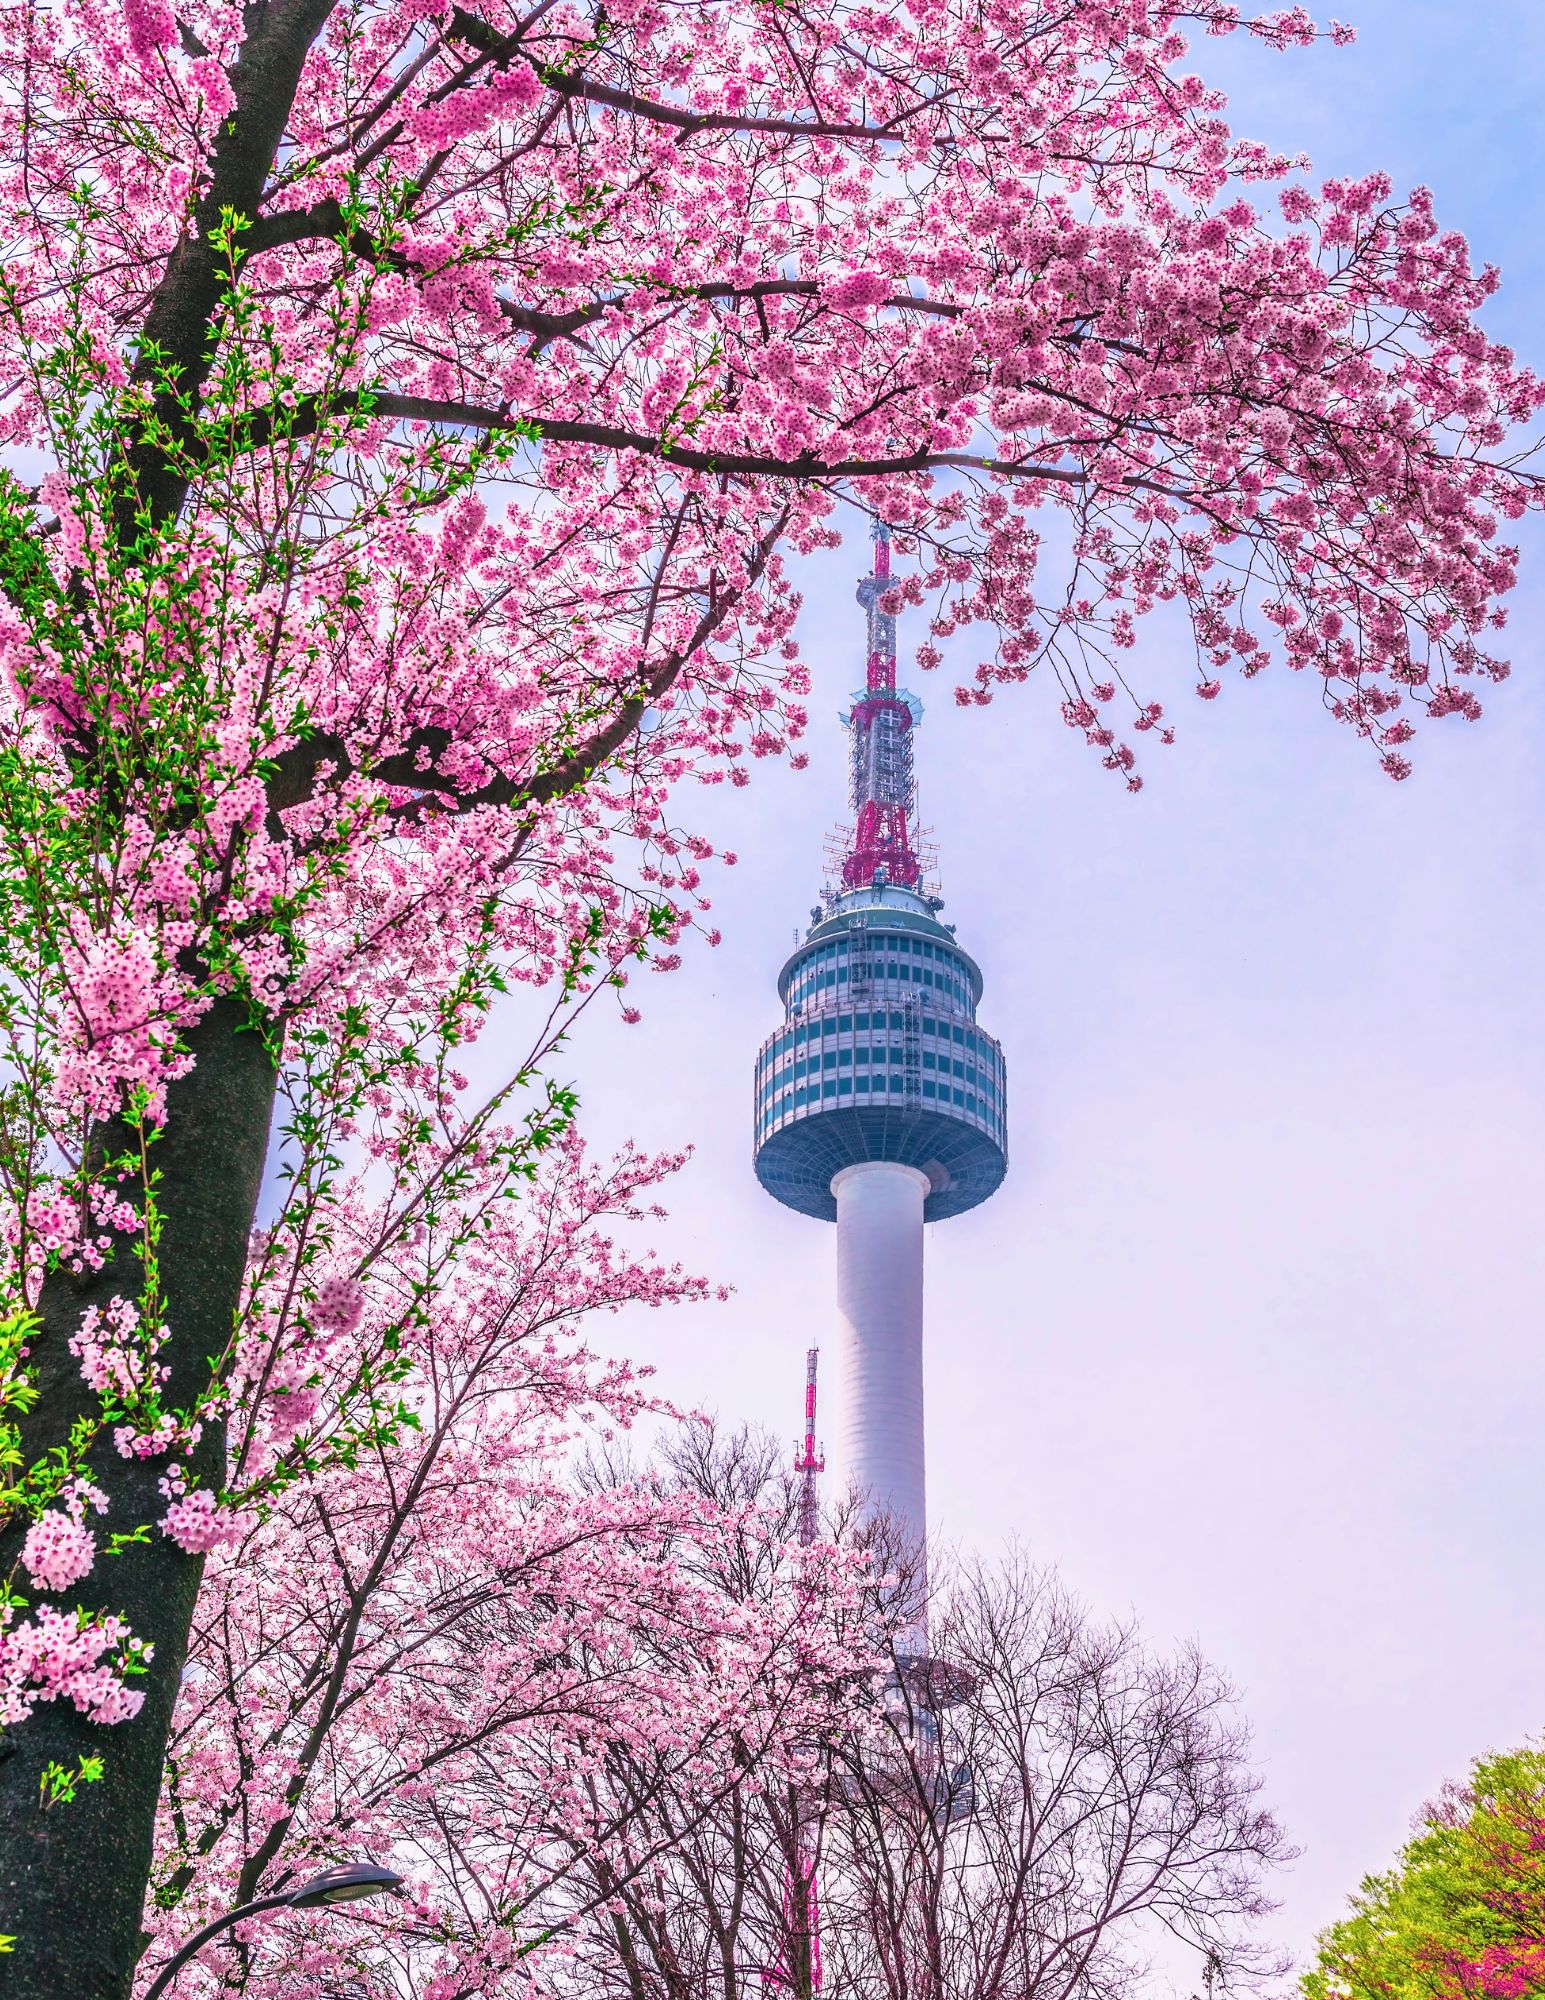 N Seoul Tower with cherry blossoms